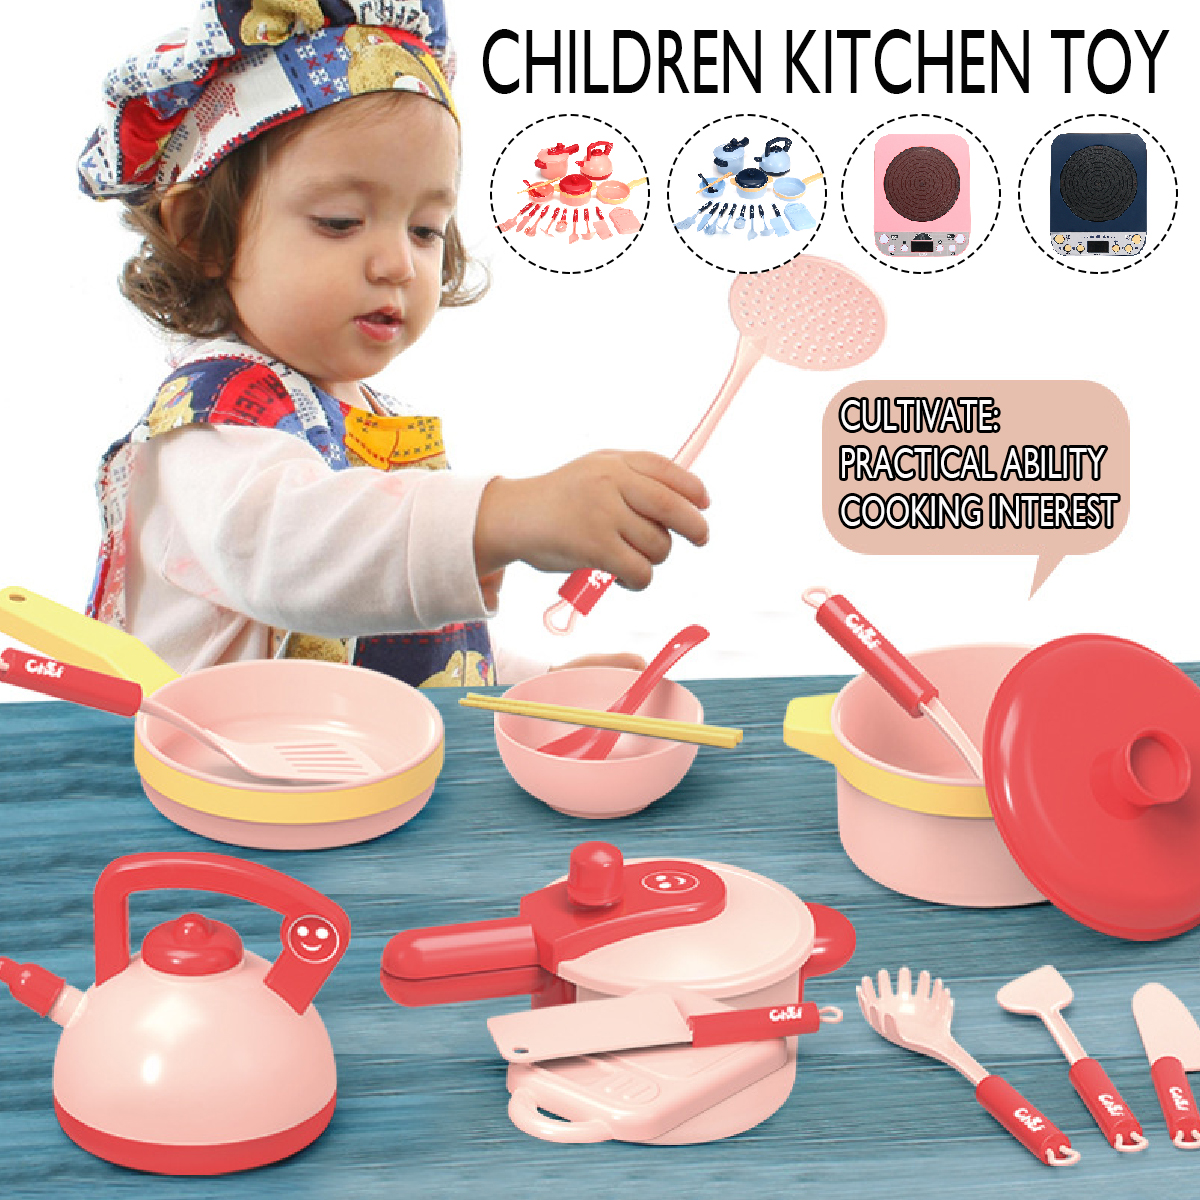 16Pcs-Simulation-Kitchen-Cooking-Play-Role-playing-Set-Toys-Practical-Skills-for-Children-Gift-1691330-2